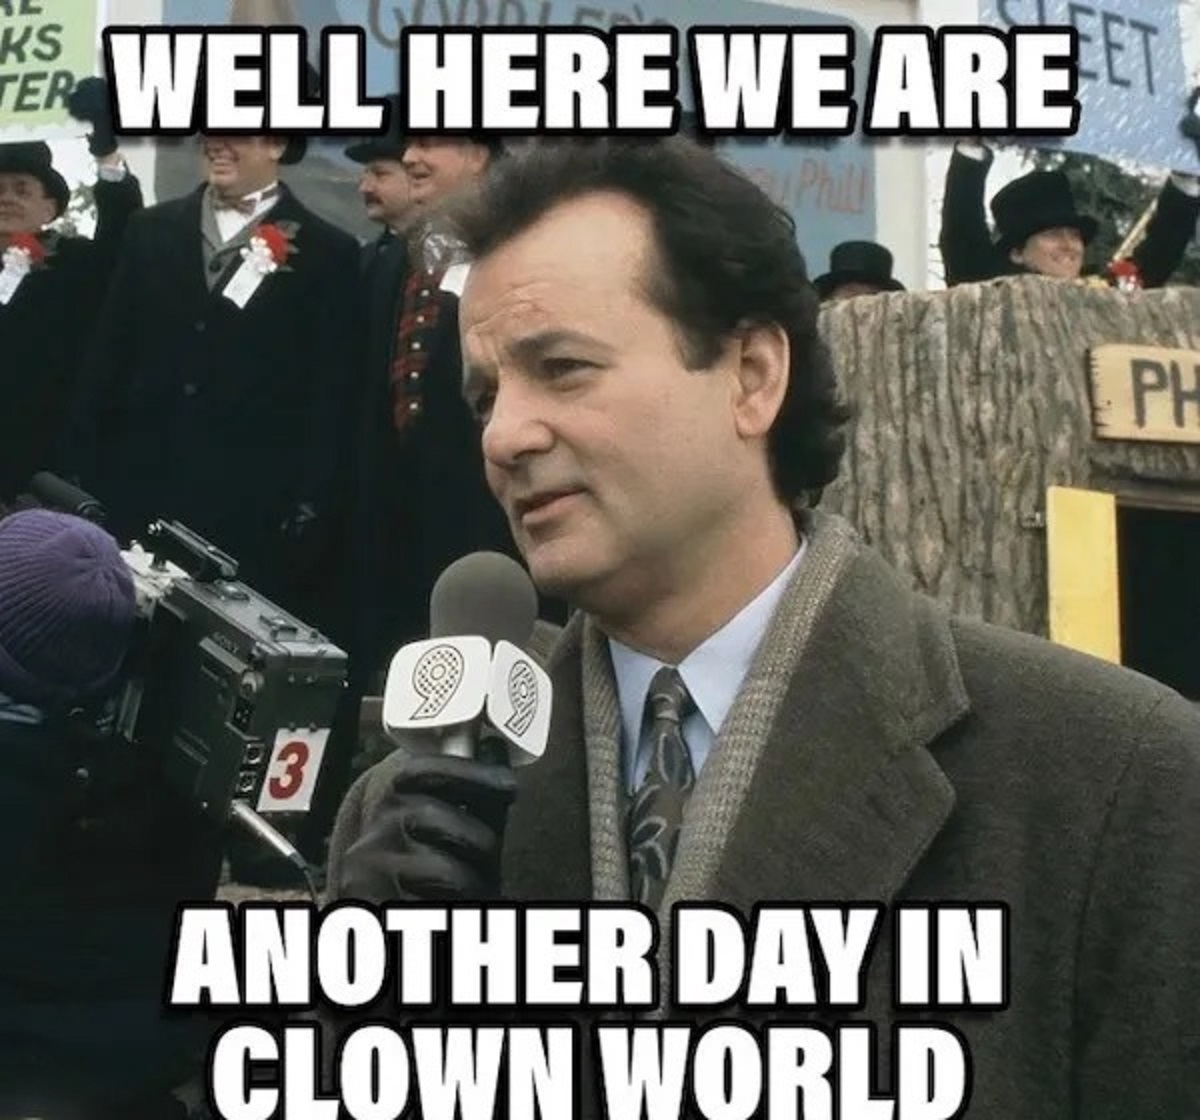 groundhog day movie pittsburgh scenes - Ks Ter Well Here We Are Et Goly 3 Another Day In Clown World Ph